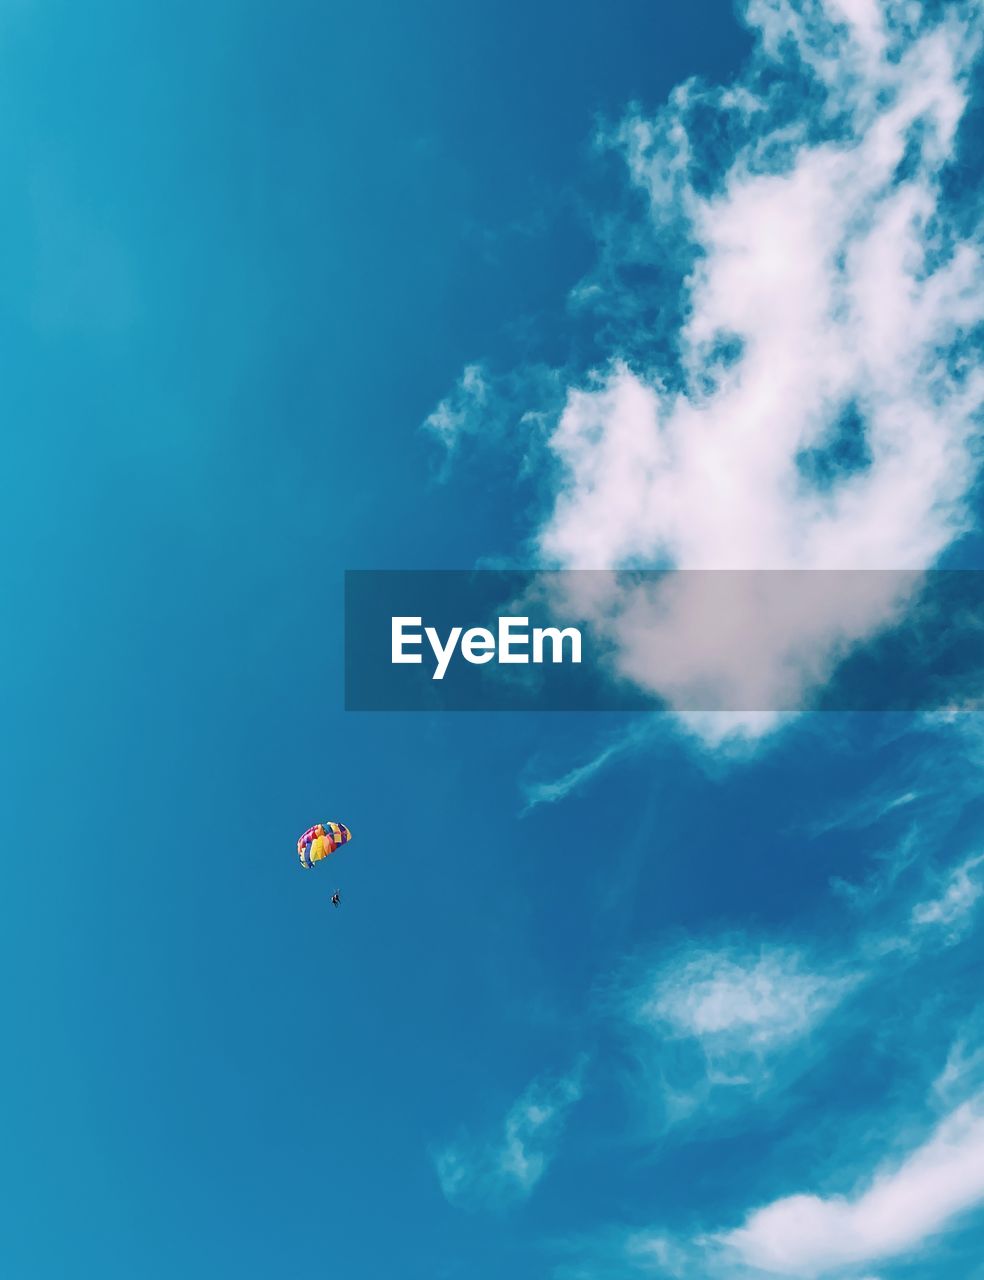 sky, cloud, blue, flying, nature, mid-air, adventure, low angle view, day, extreme sports, parachute, sports, beauty in nature, outdoors, transportation, scenics - nature, parachuting, leisure activity, environment, air vehicle, holiday, paragliding, sea, tranquility, balloon, joy, motion, water, trip, copy space